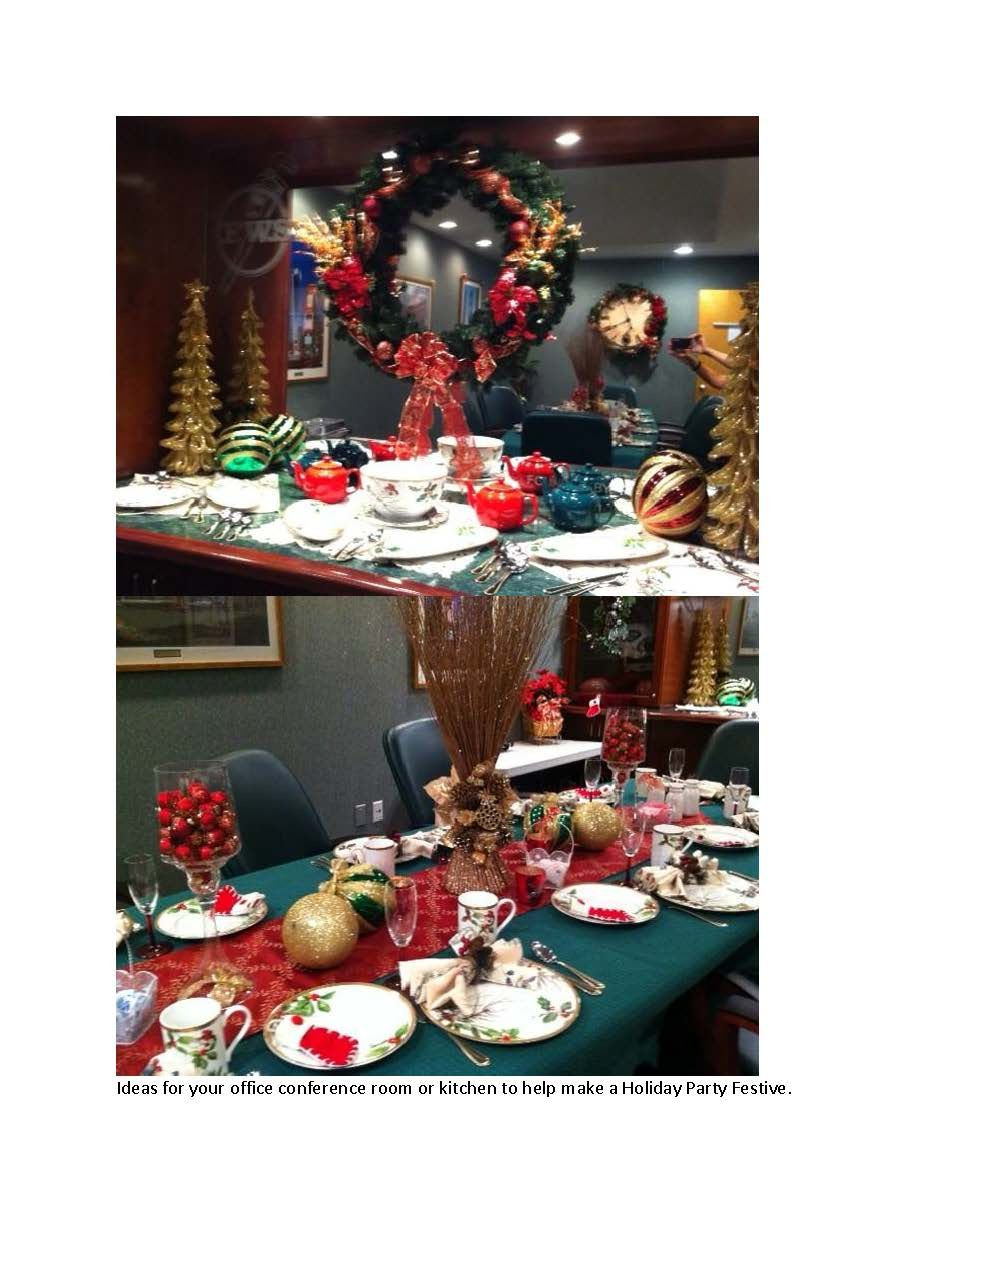 Office Holiday Party Decorating Ideas
 Some ideas to turn your office conference room or kitchen